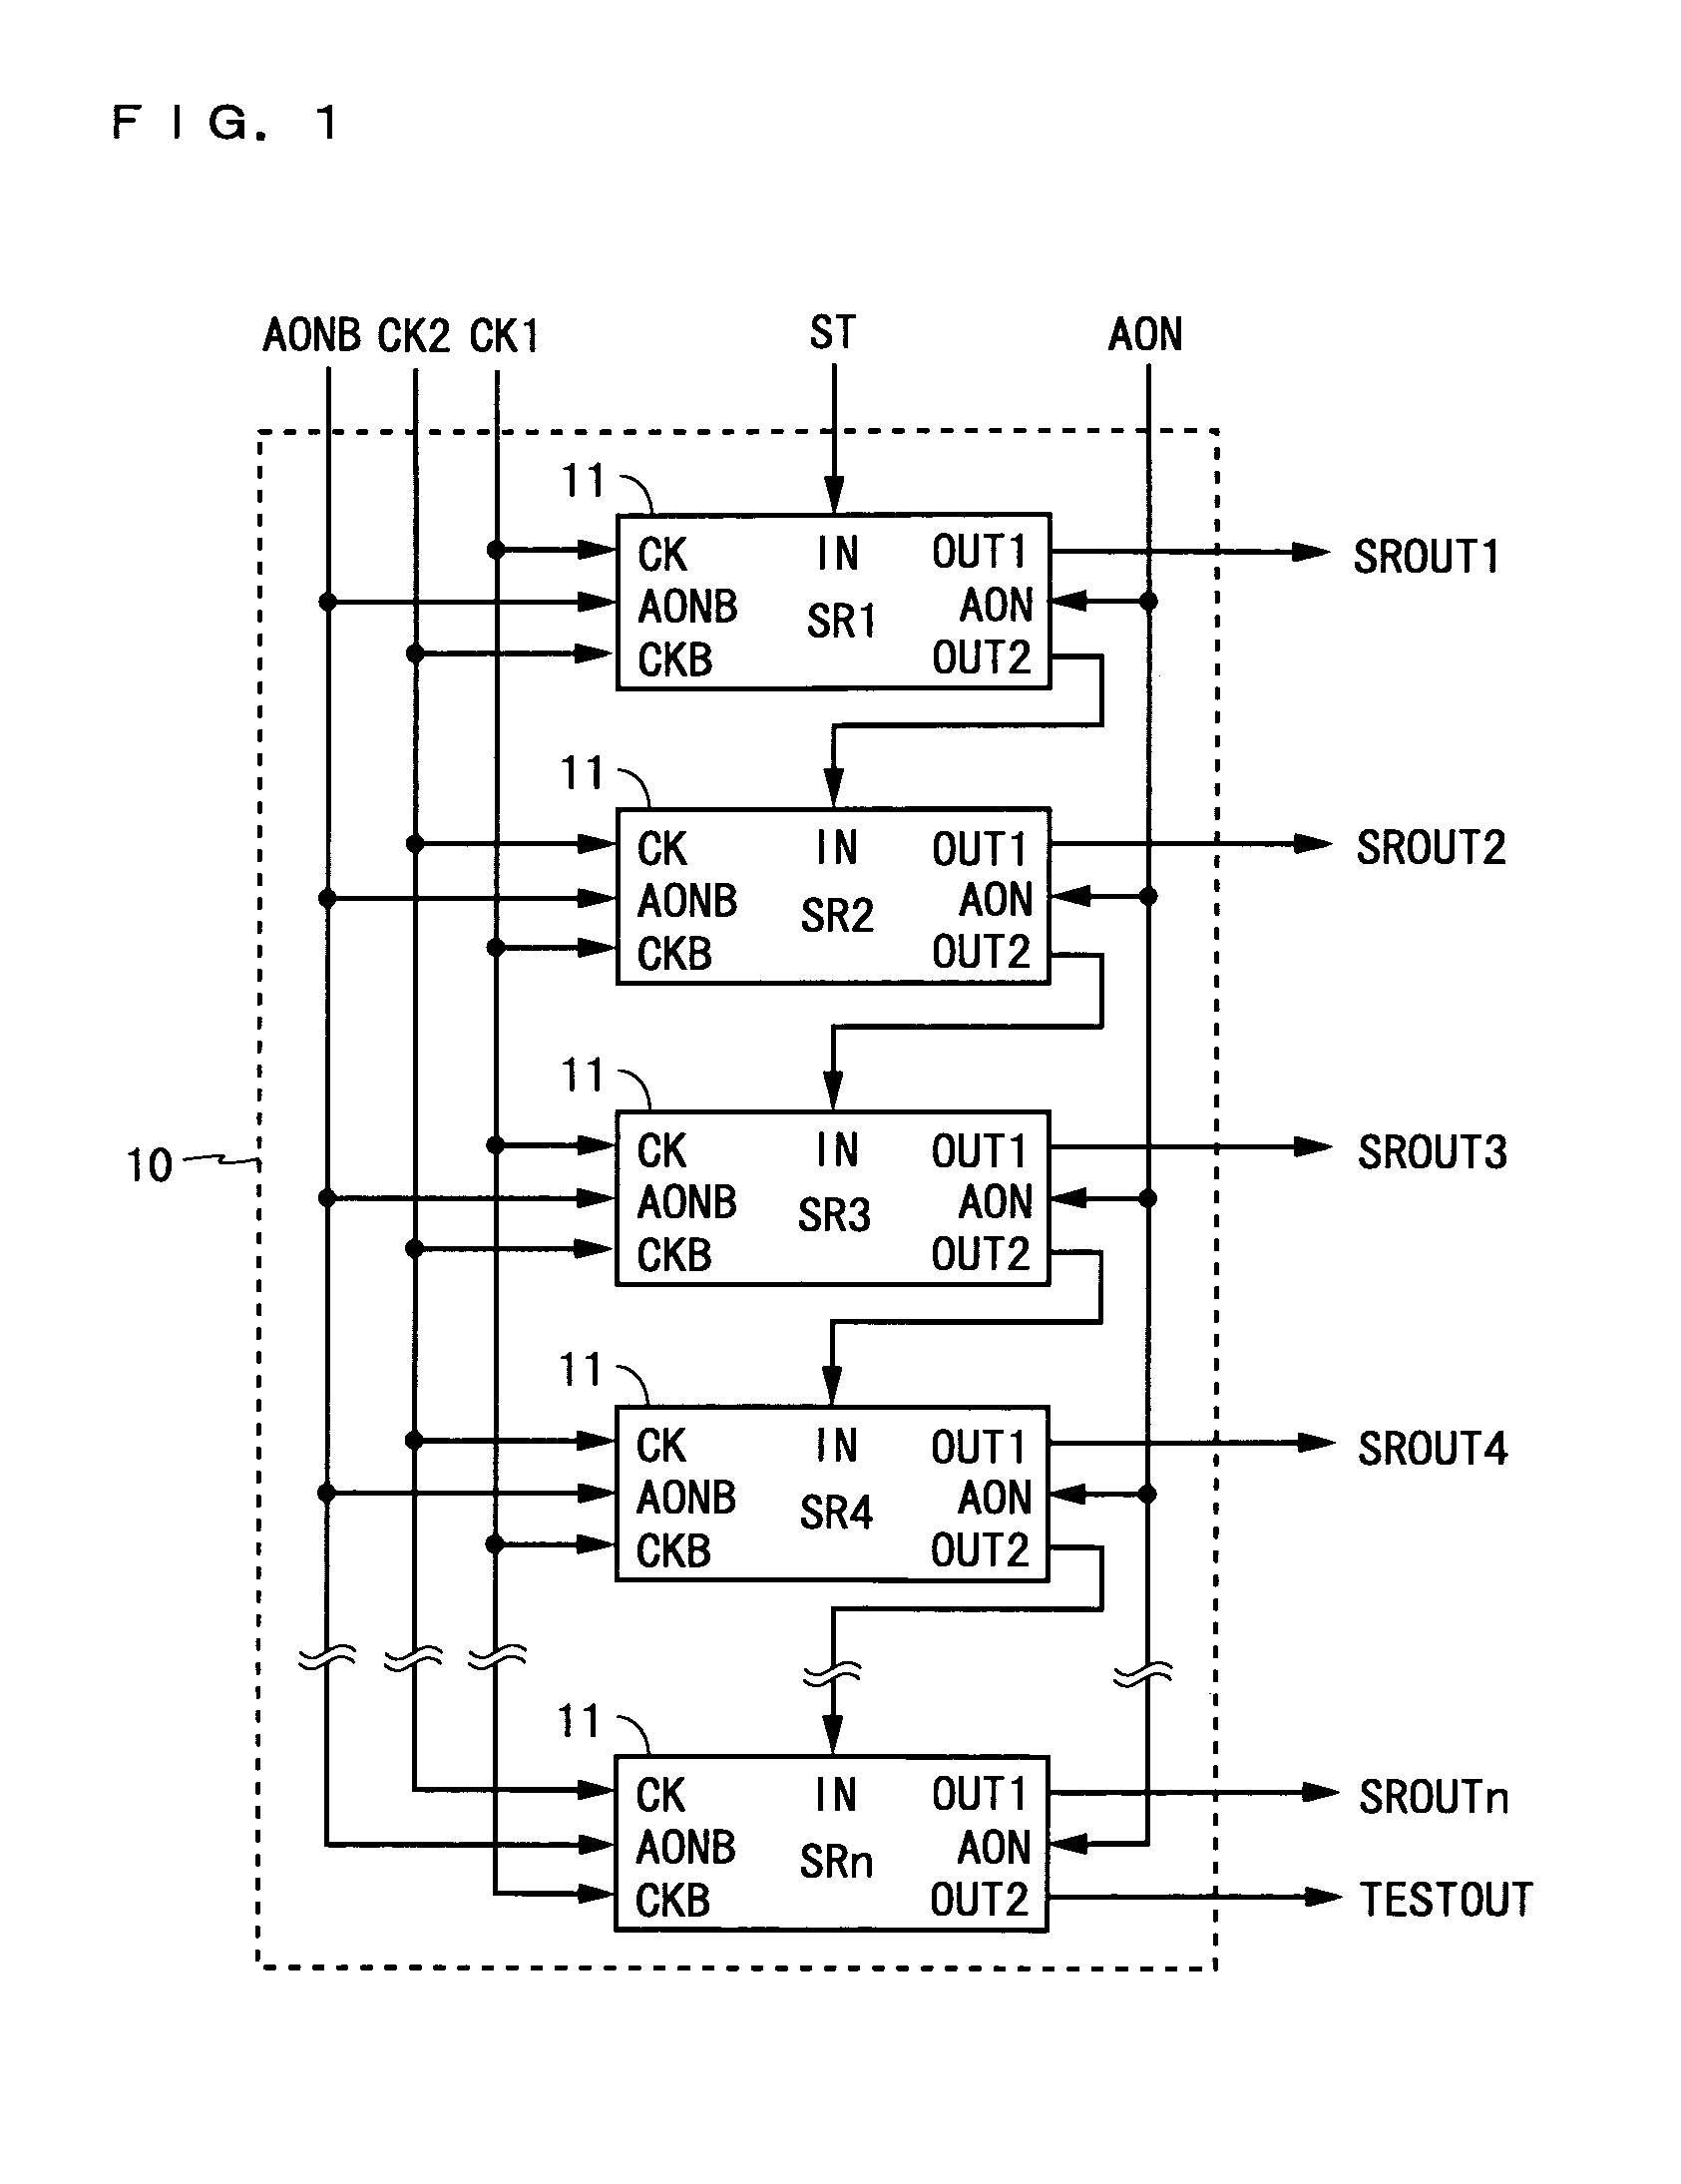 Shift register receiving all-on signal and display device